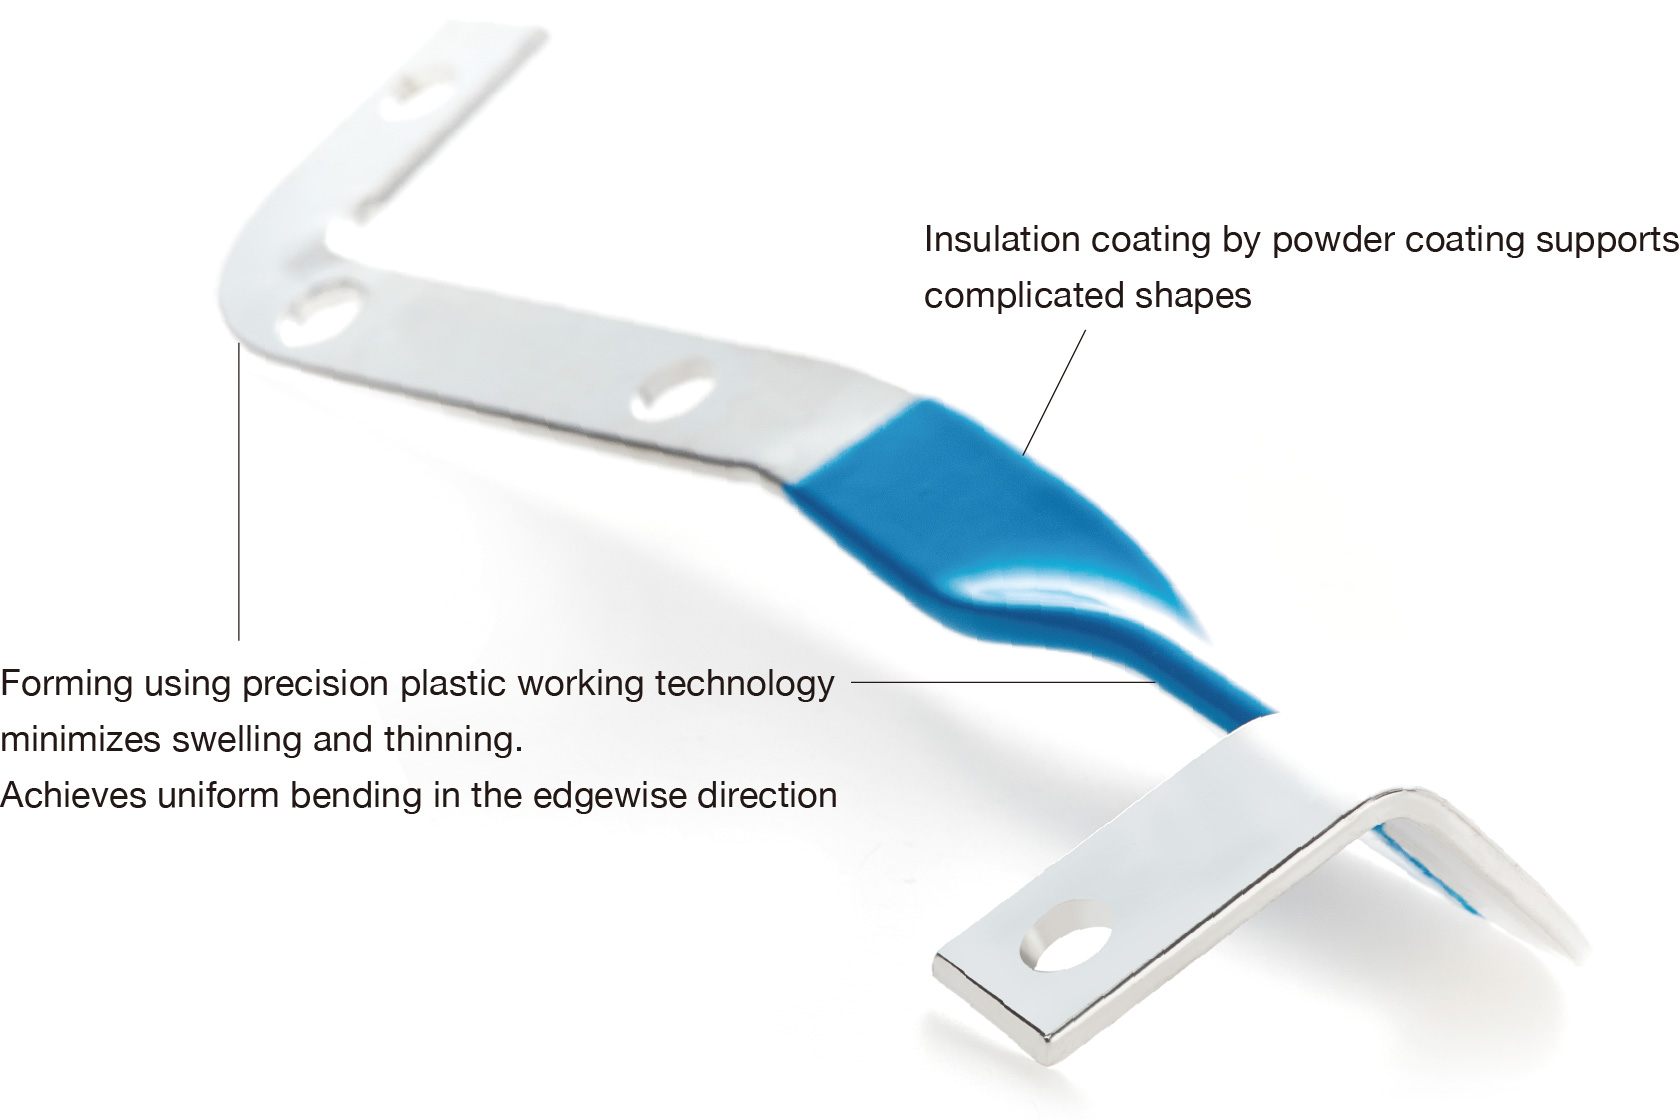 Insulation coating by powder coating supports complicated shapes. Forming using precision plastic working technology minimizes swelling and thinning. Achieves uniform bending in the edgewise direction.